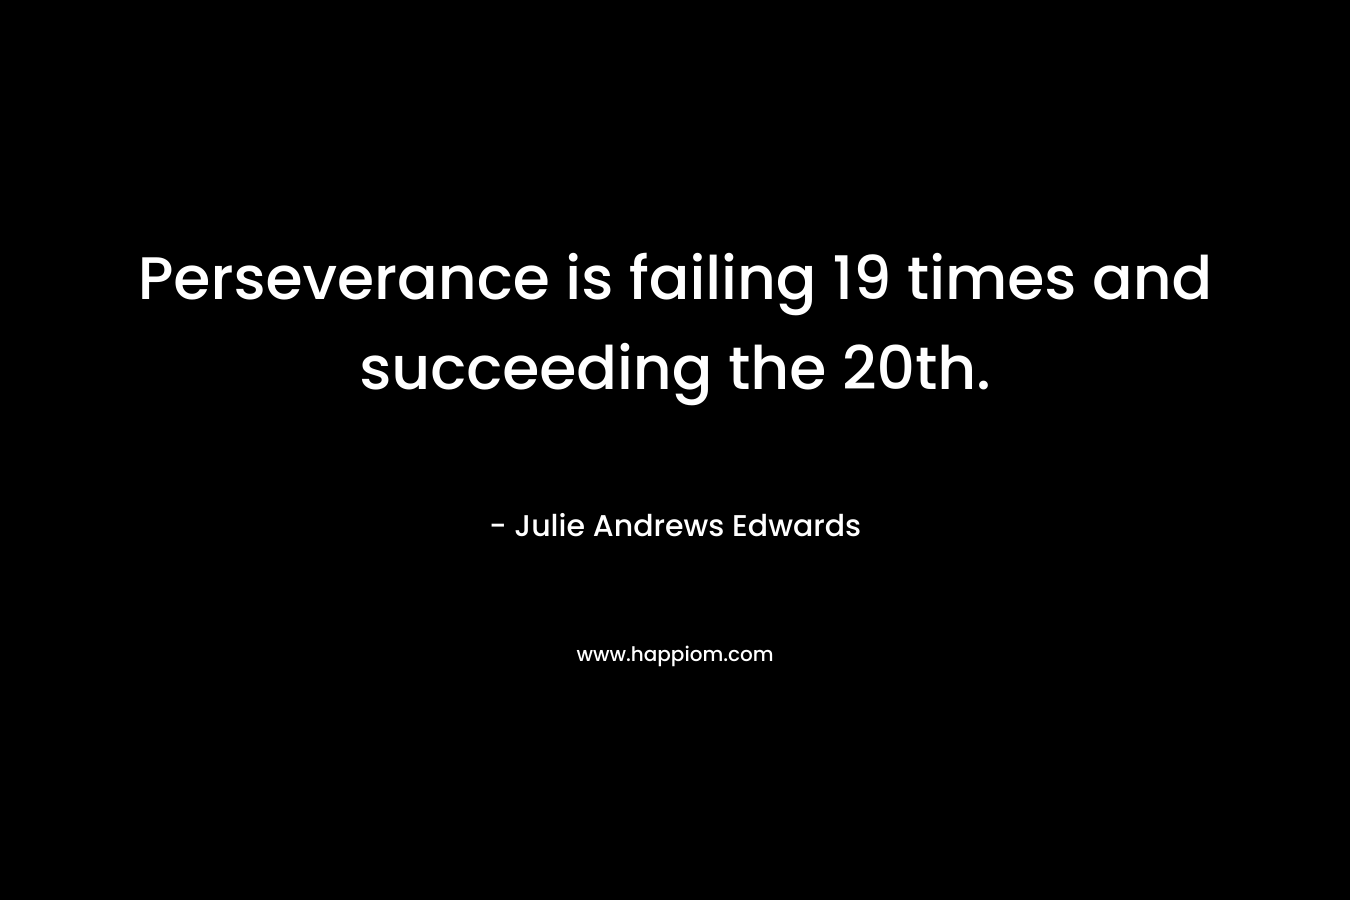 Perseverance is failing 19 times and succeeding the 20th.